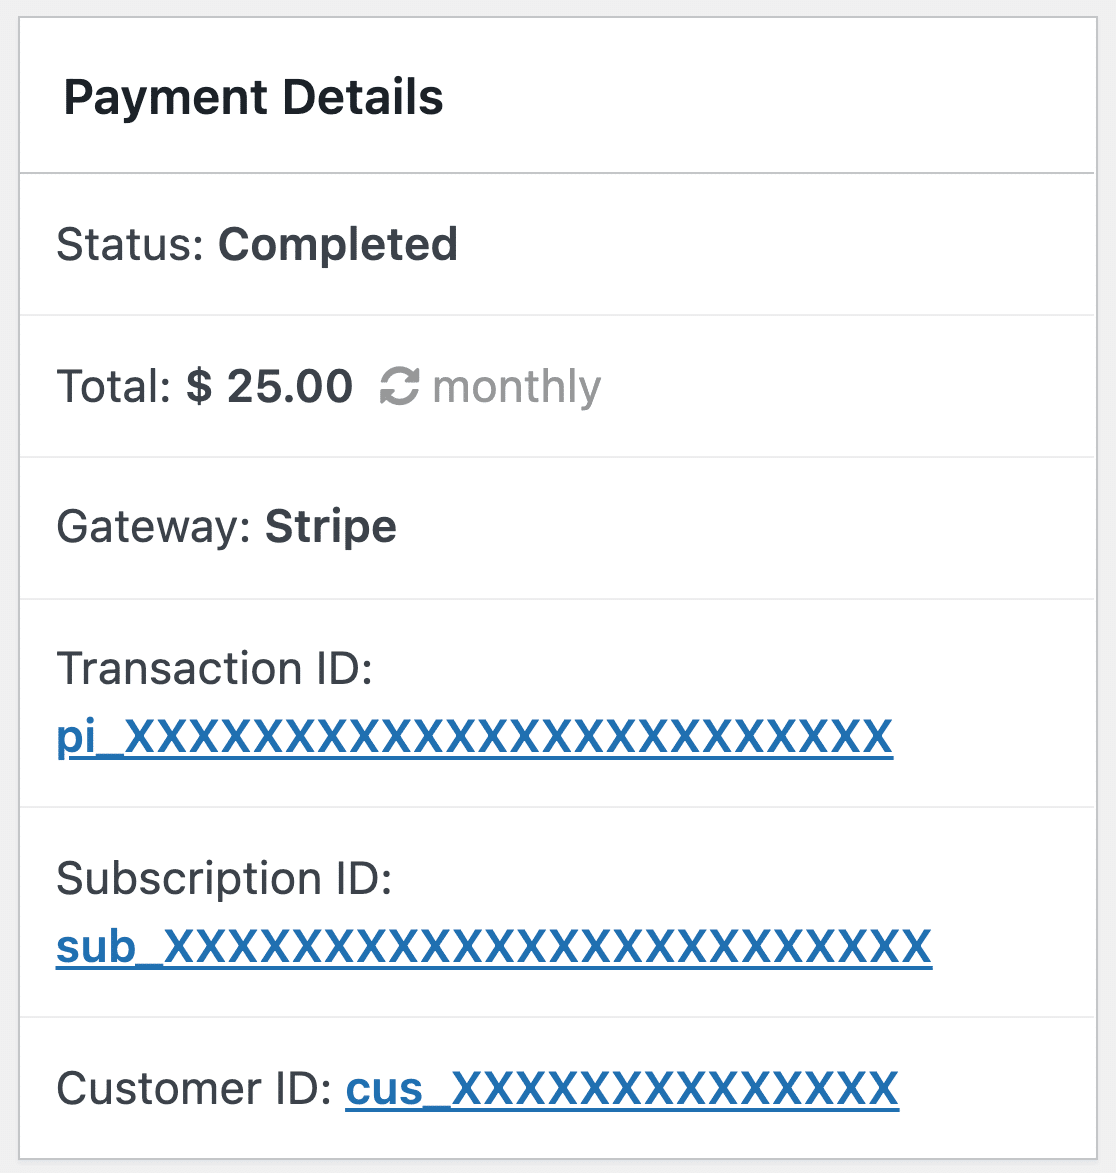 Entry payment details for a Stripe subscription payment